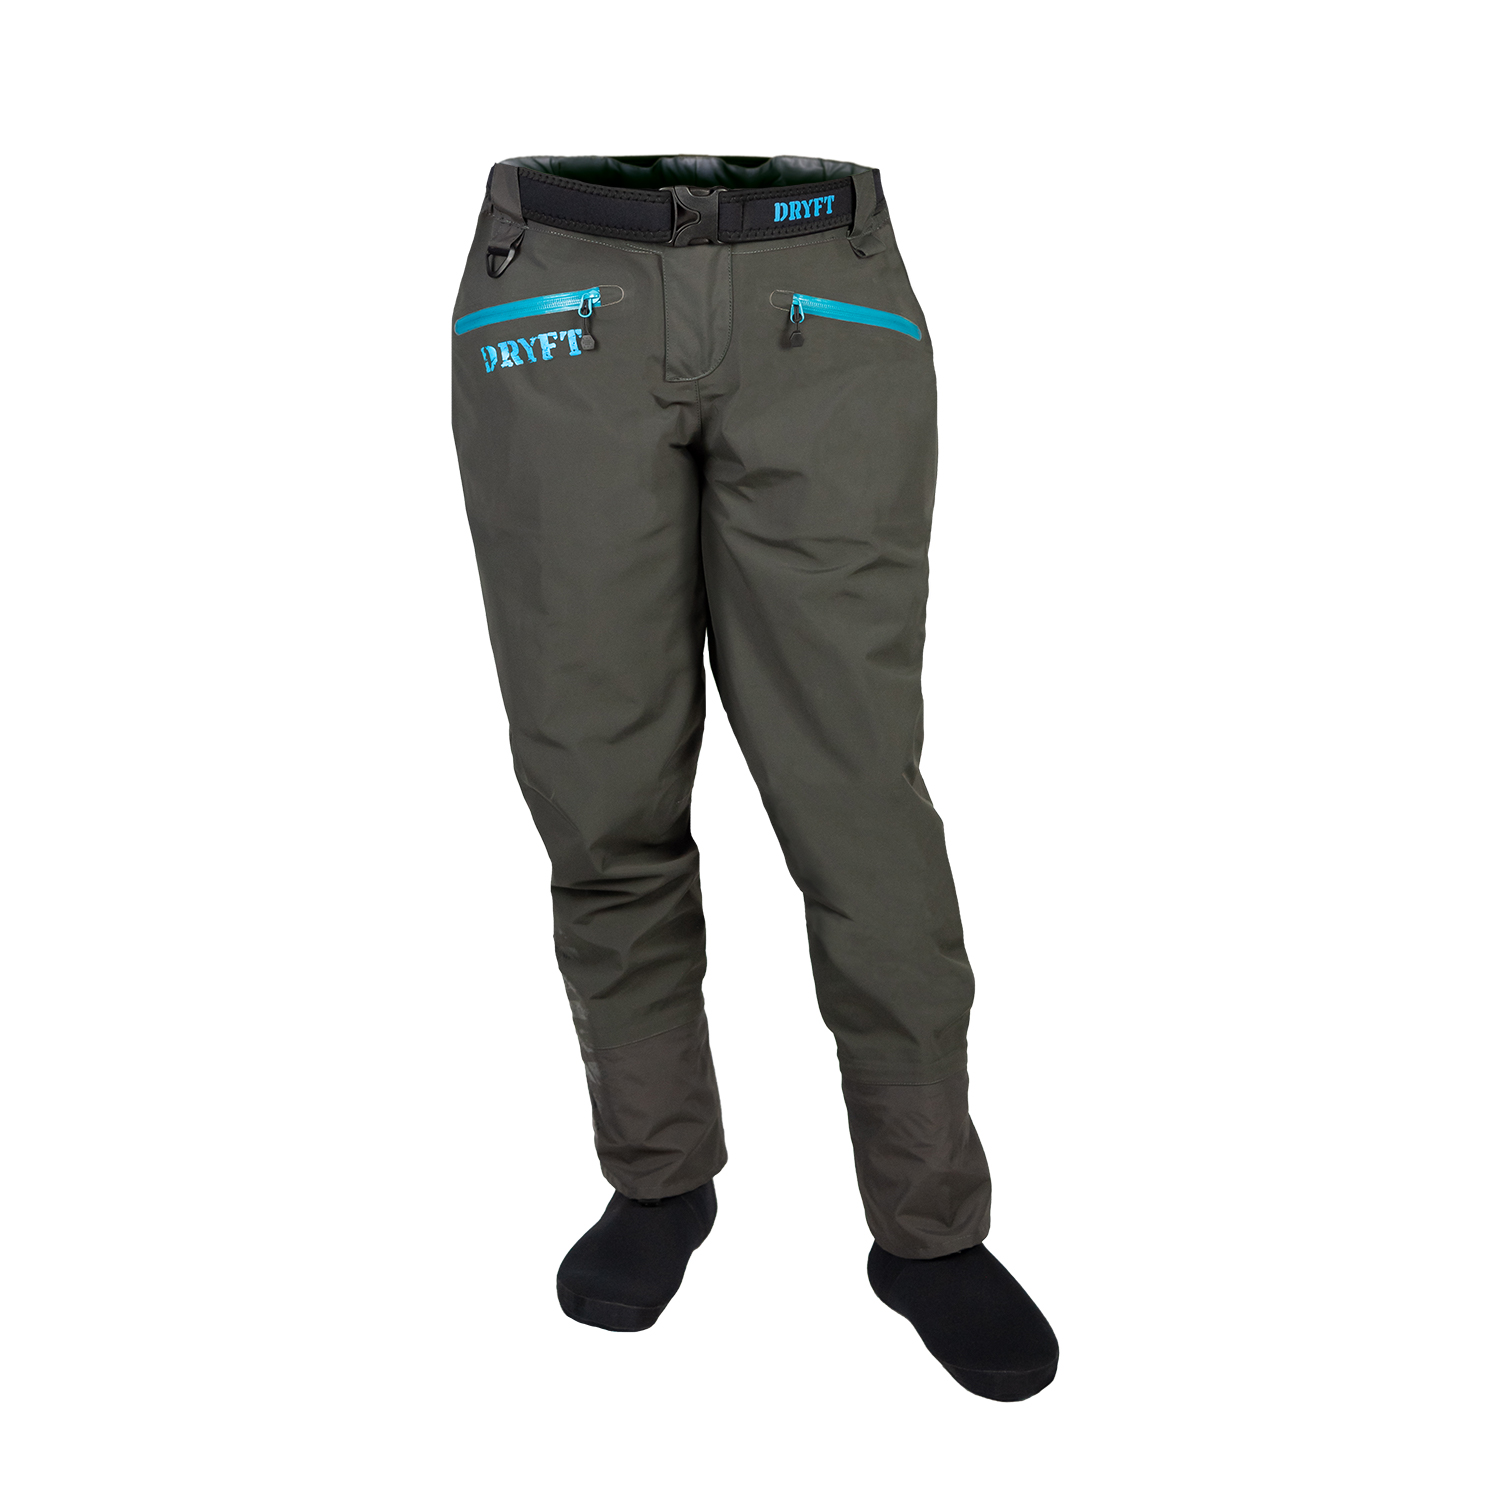 Youthink Fishing Wader Pants, Comfortable Sealed Waterproof Wader Pants Soft Absorbent Flexible For Outdoor 40 Size,41 Size,42 Size,43 Size 40 Size